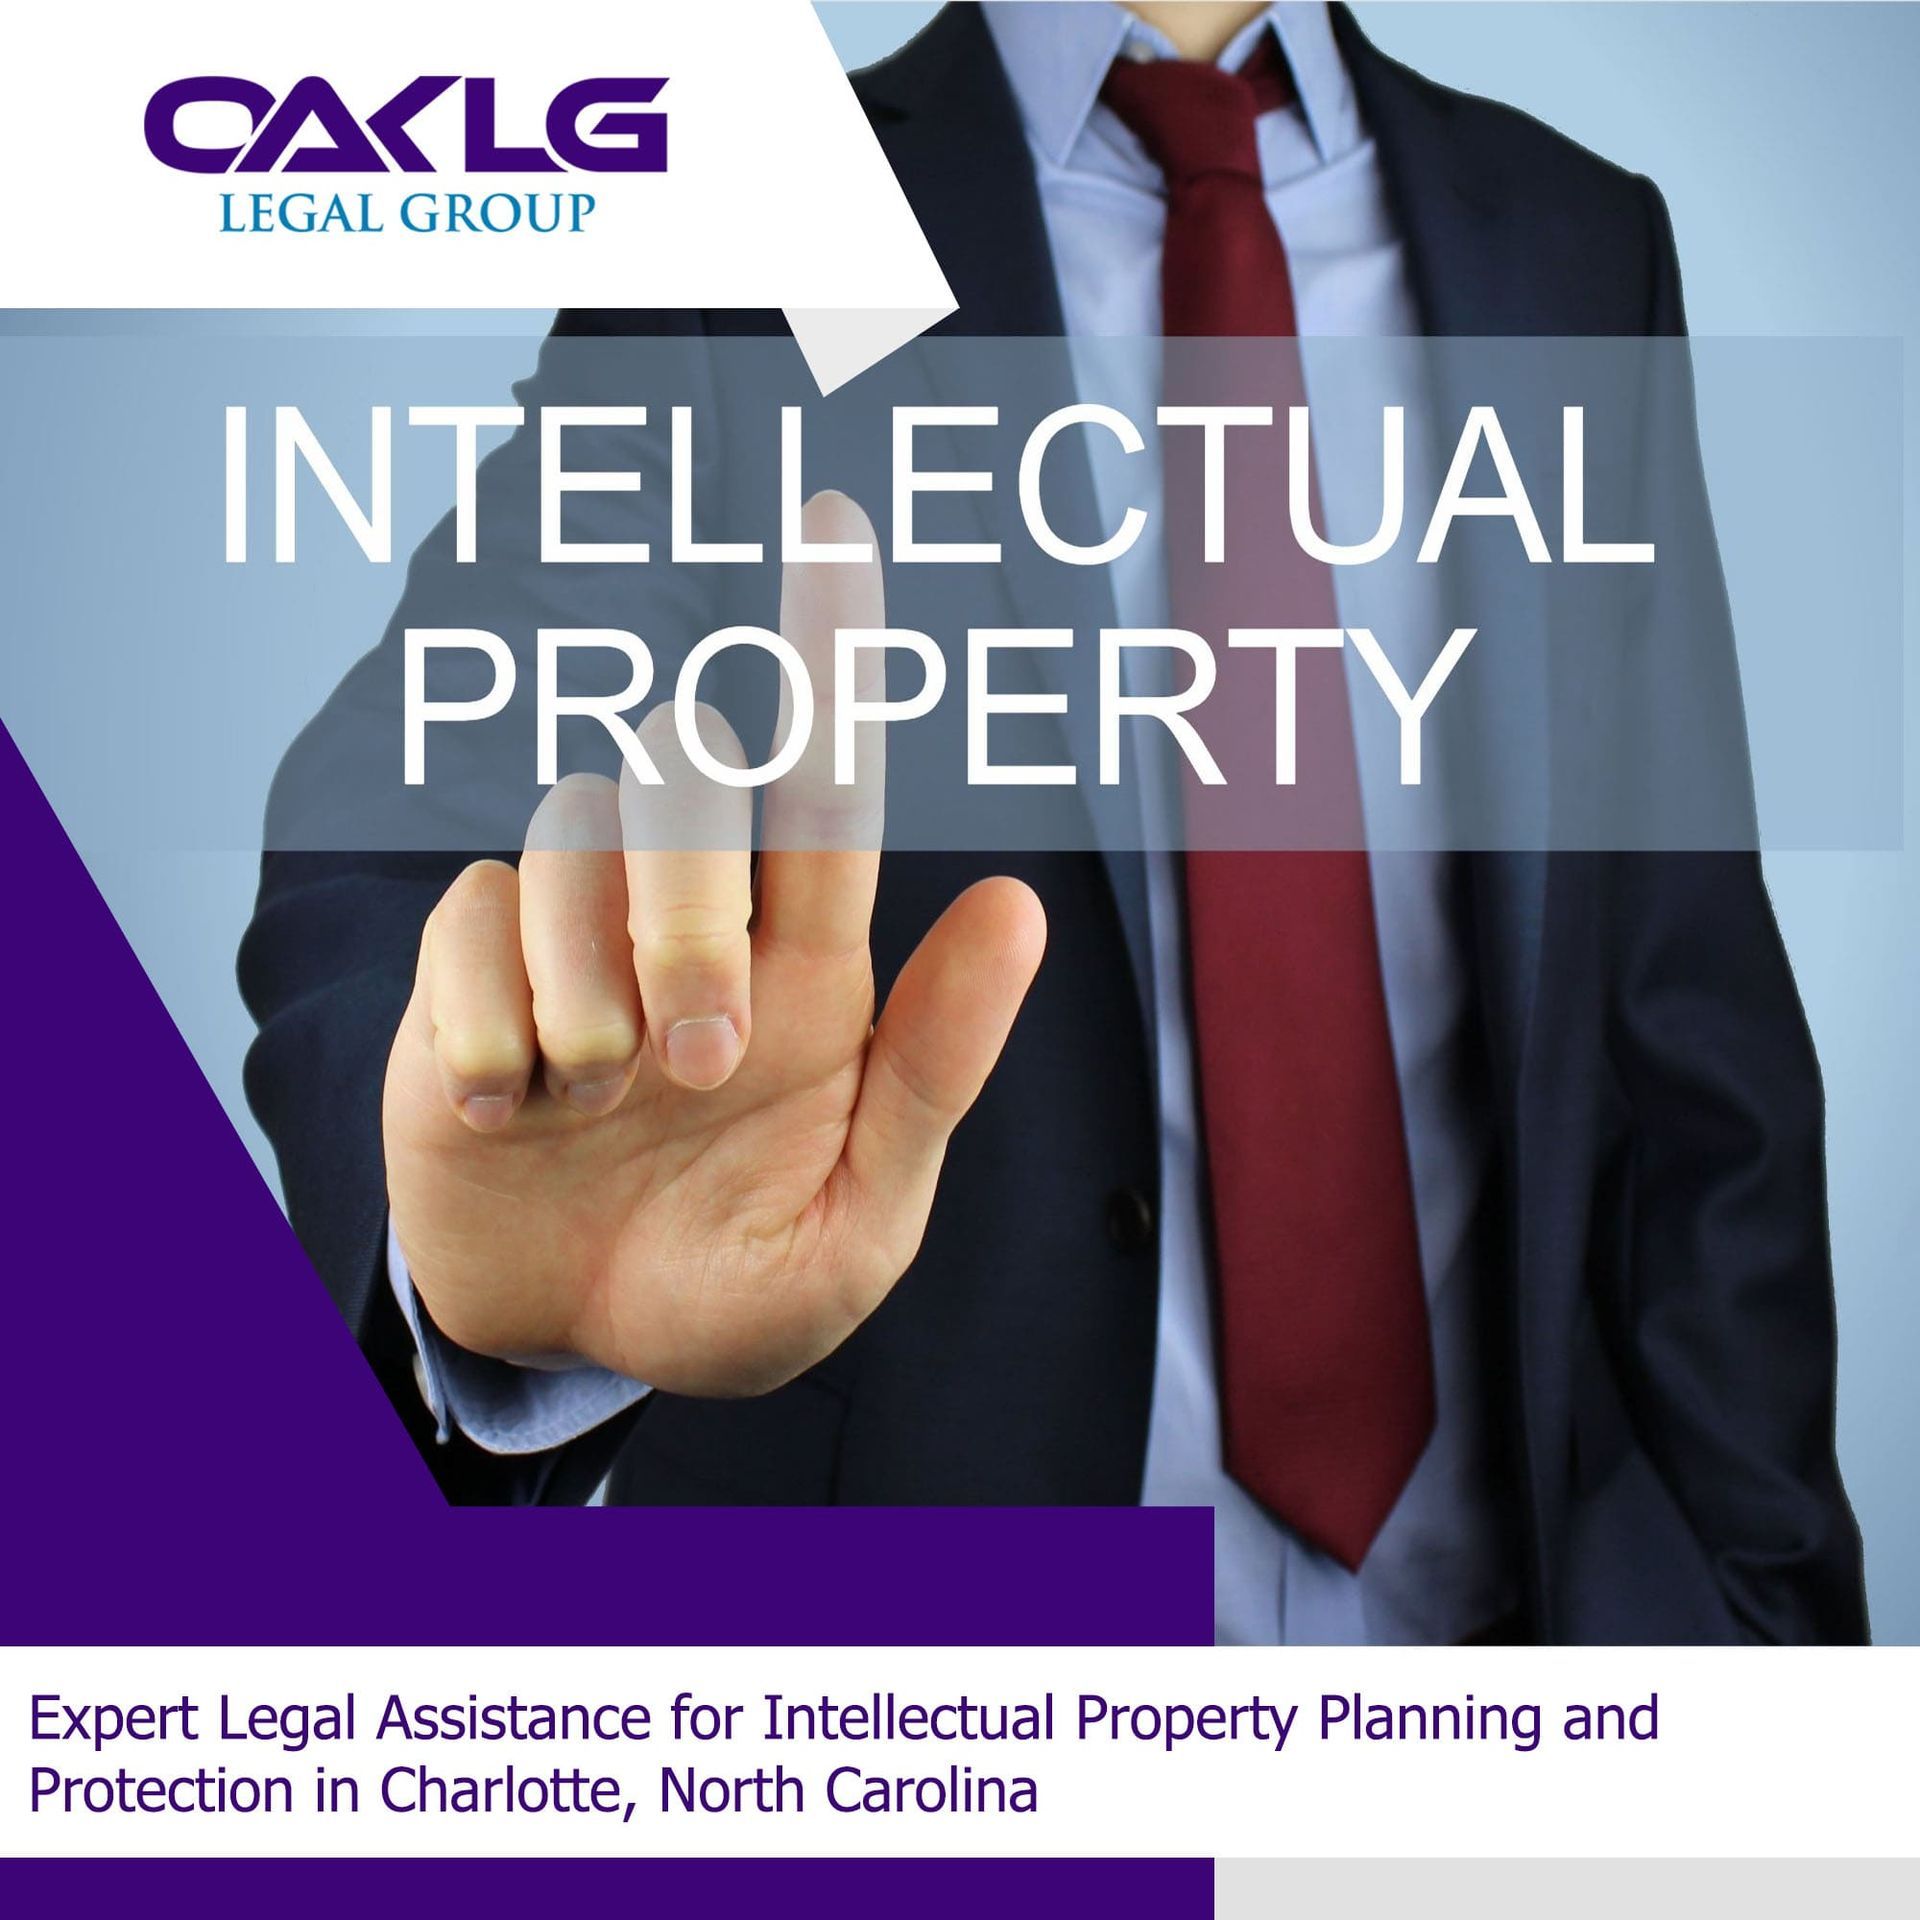 Interlectuall Property Lawyers | Legal Assistance | Oaklg